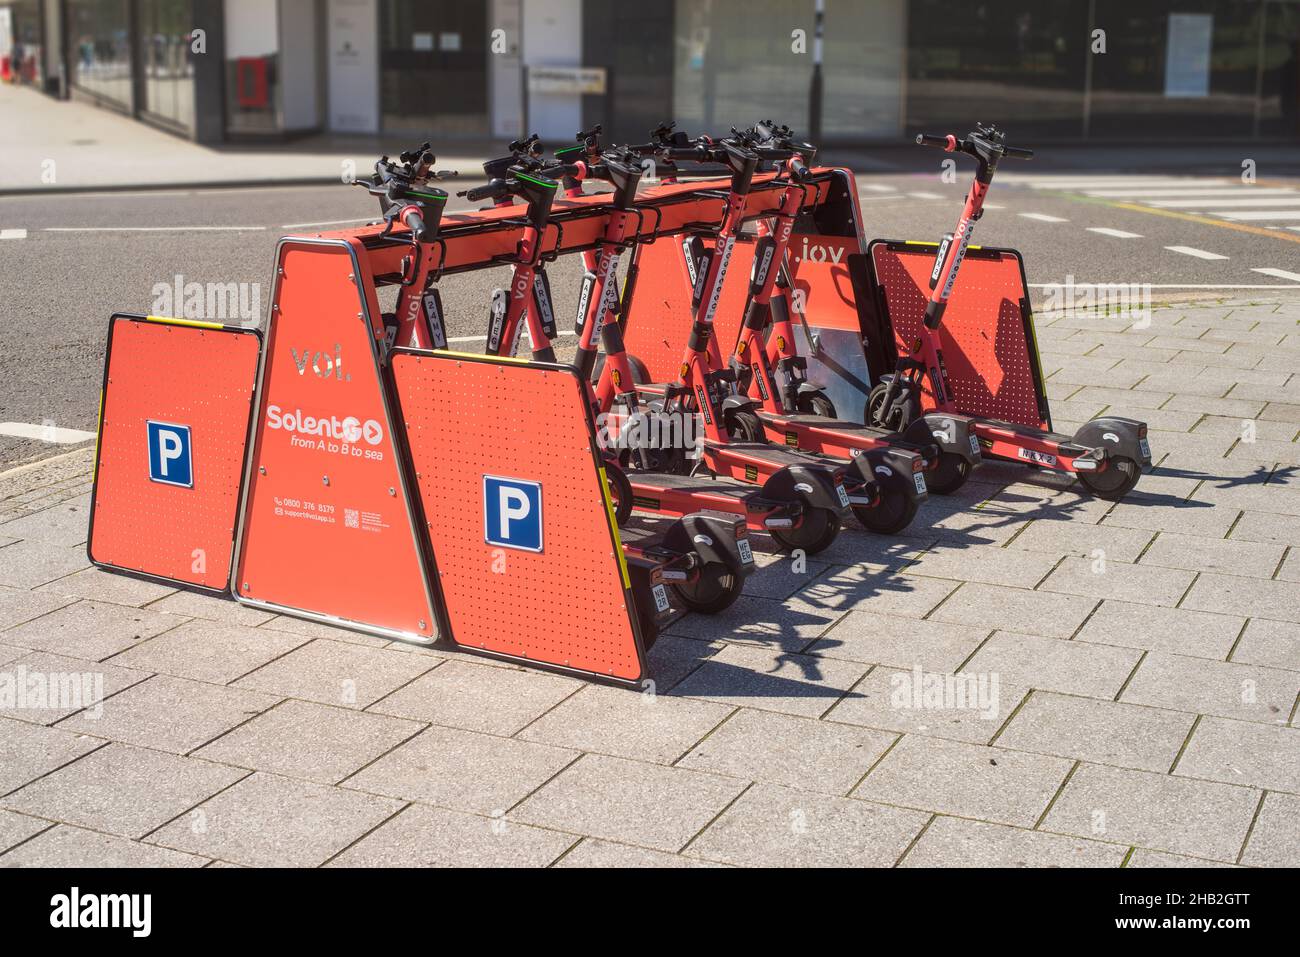 SolentGo Voi e-scooters parked in a designated rack as part of the experimental public e-scooter rental trial in Southampton in 2021 Stock Photo